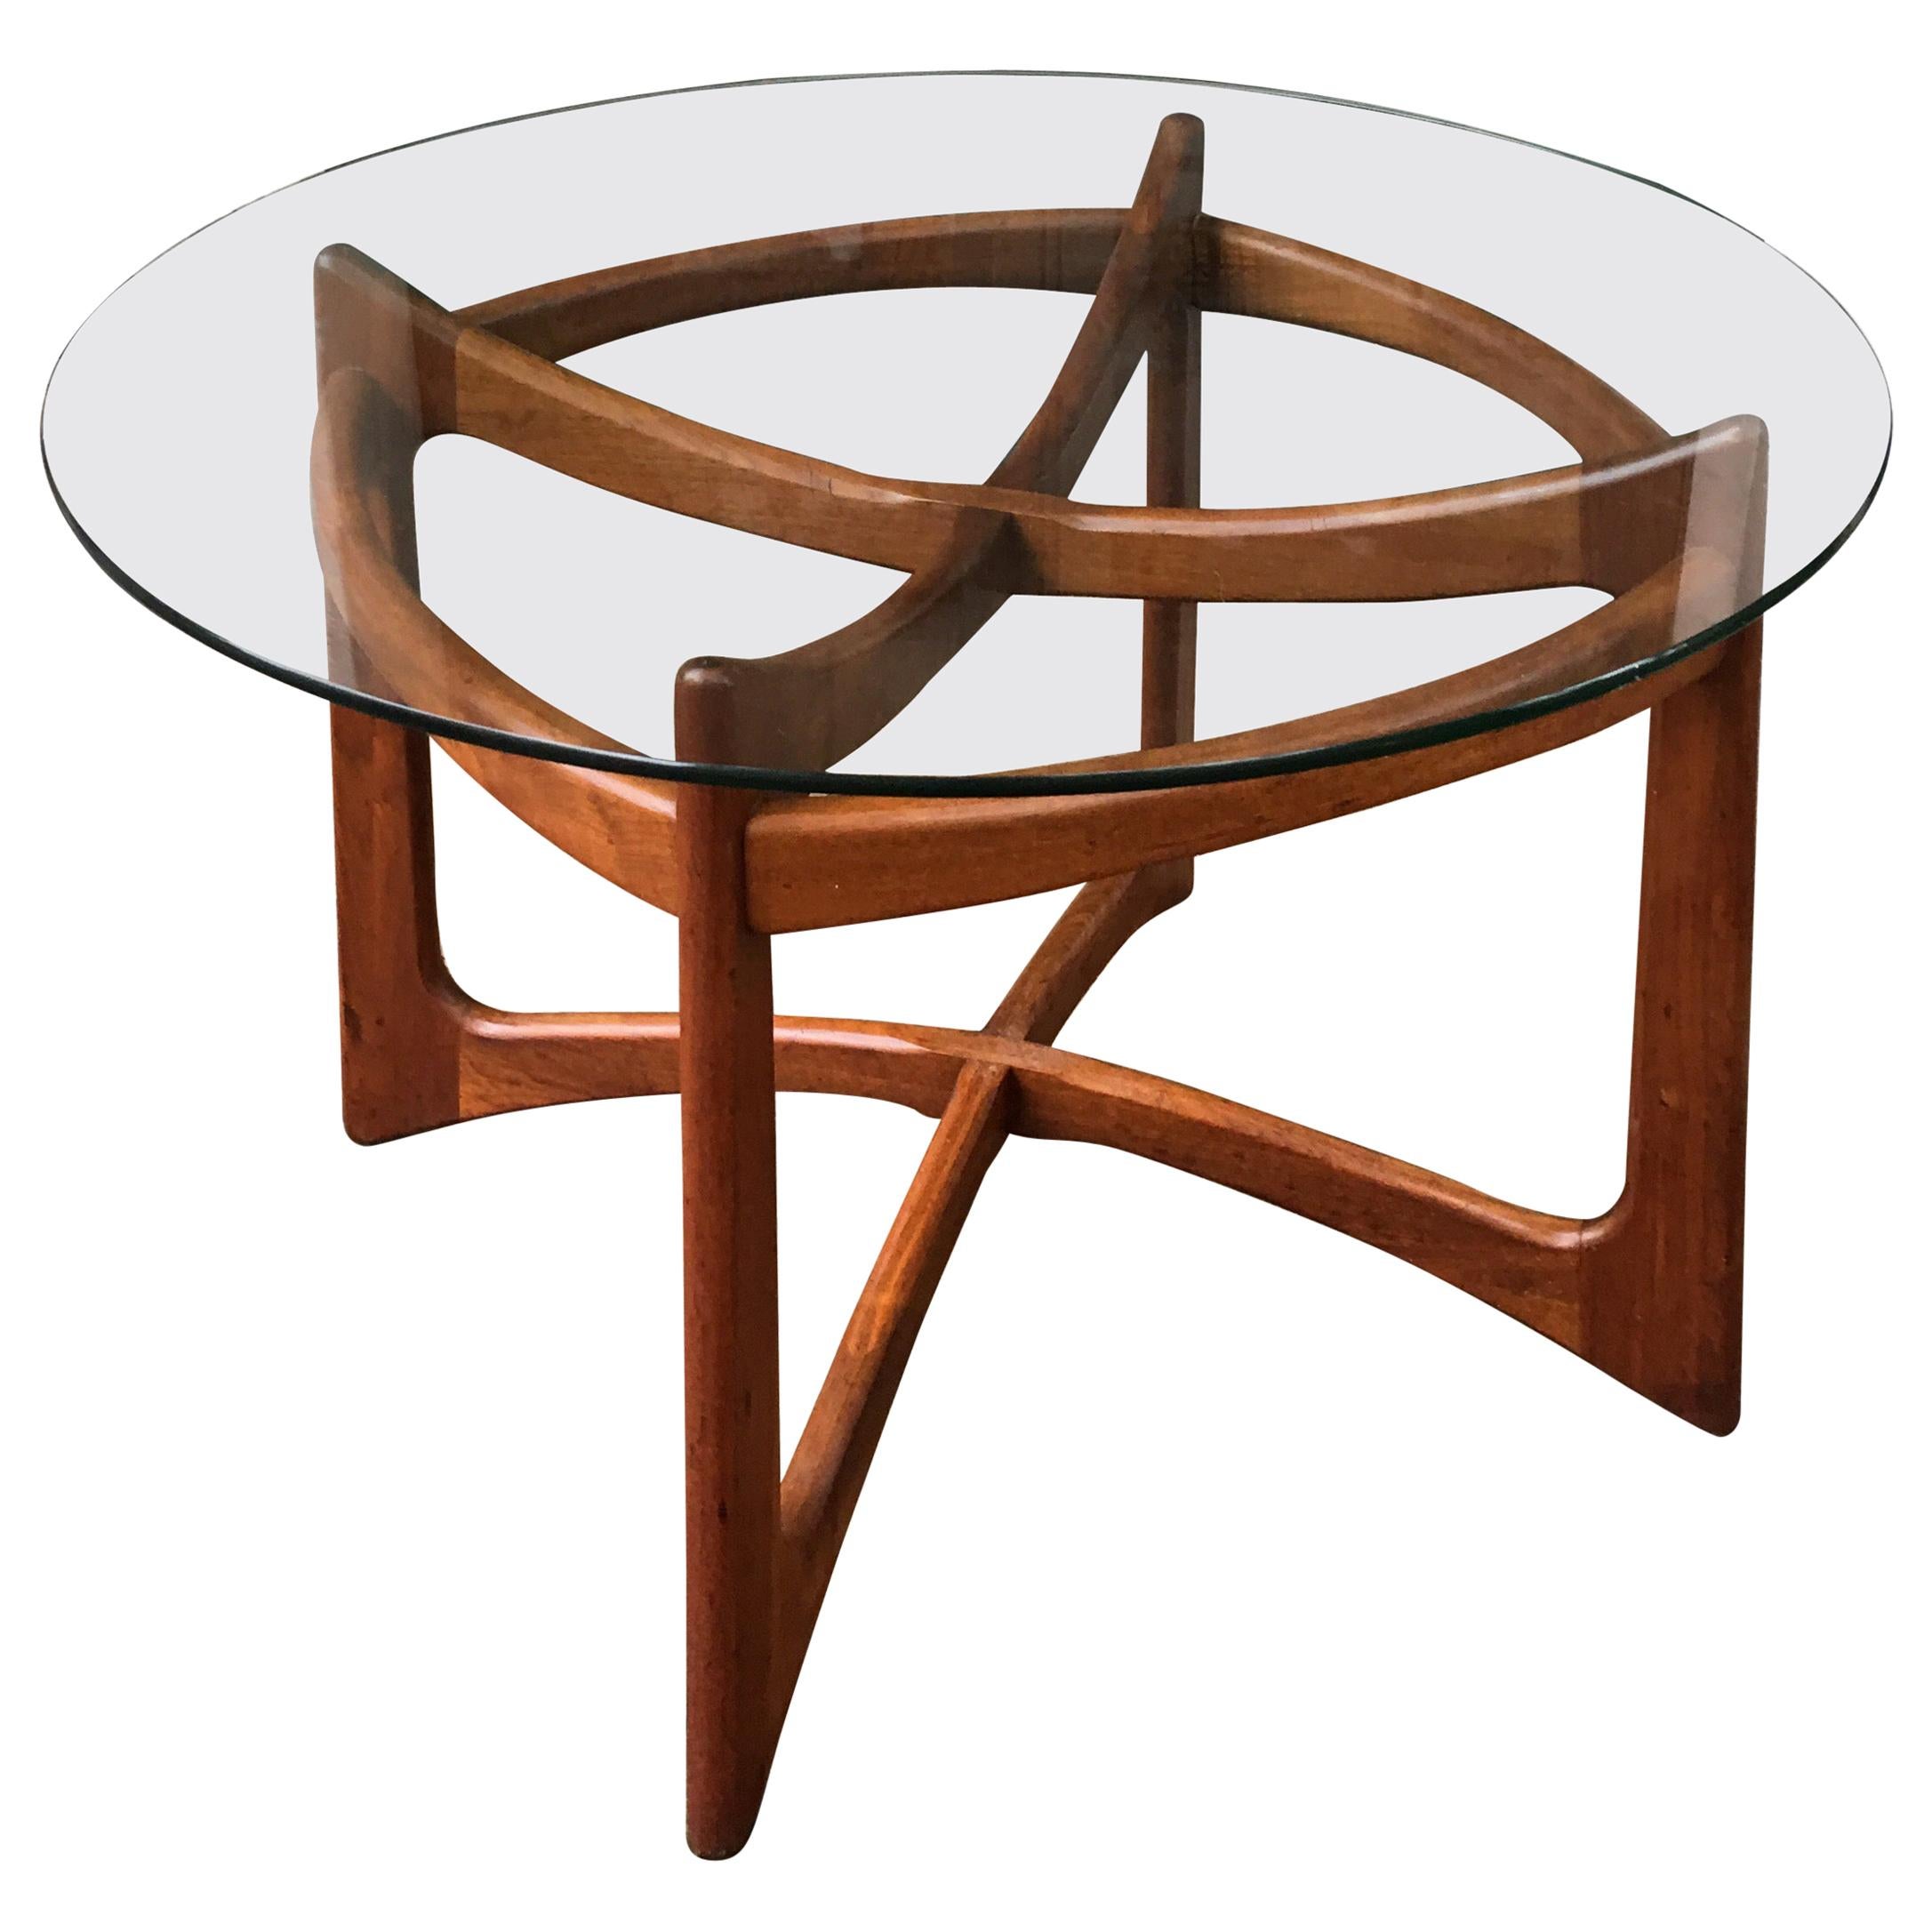 Adrian Pearsall for Craft Associates Walnut and Glass Dining Table